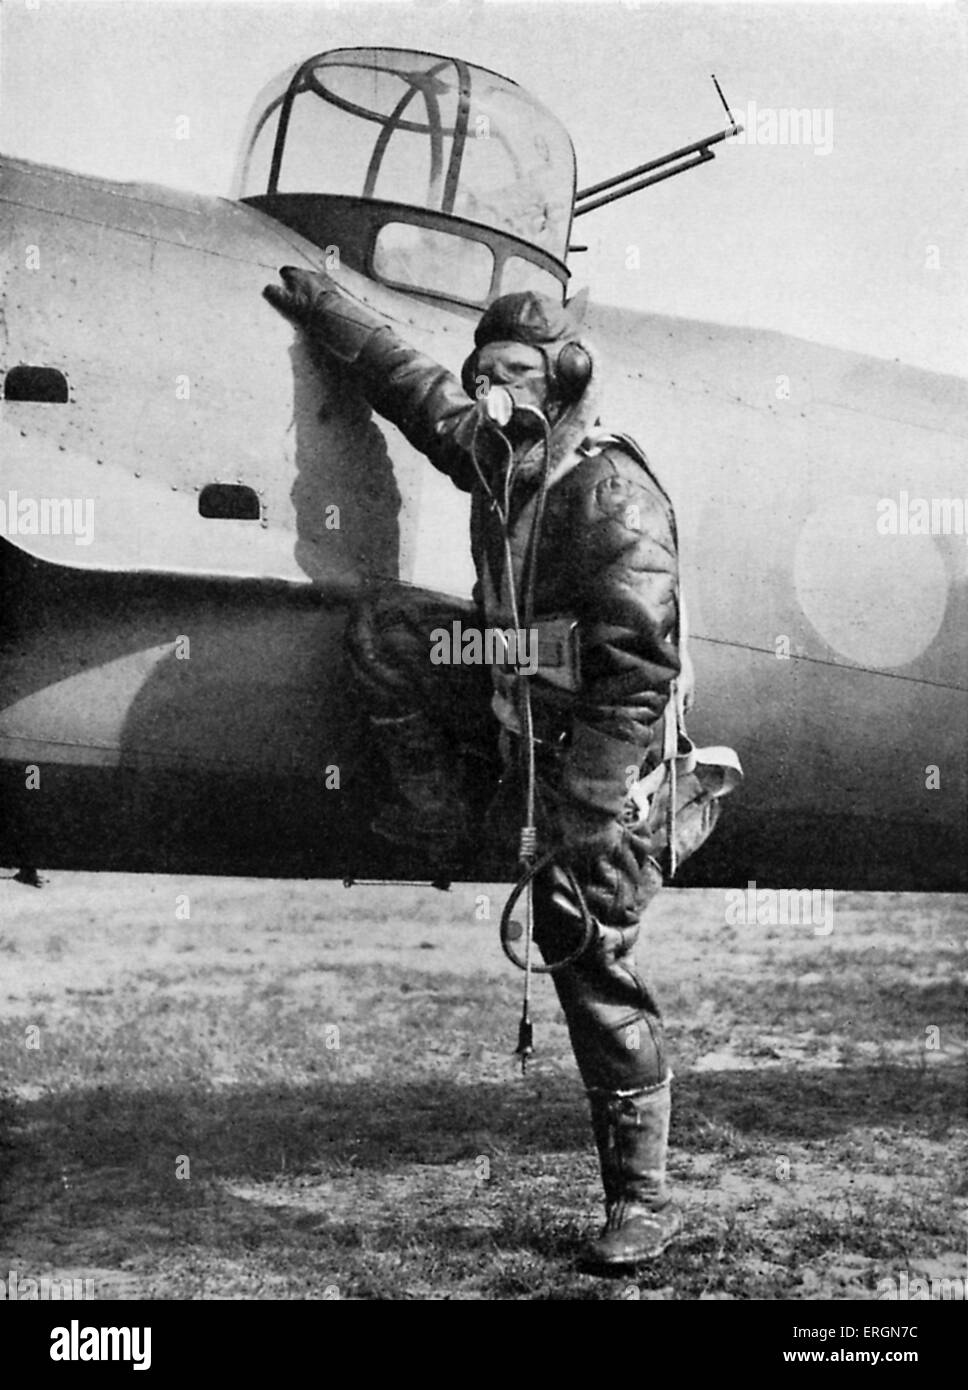 WW2 - Equipment of a British pilot. RAF pilot in full gear next to his plane. Caption reads: Equipped for air fighting: oxygen, Stock Photo